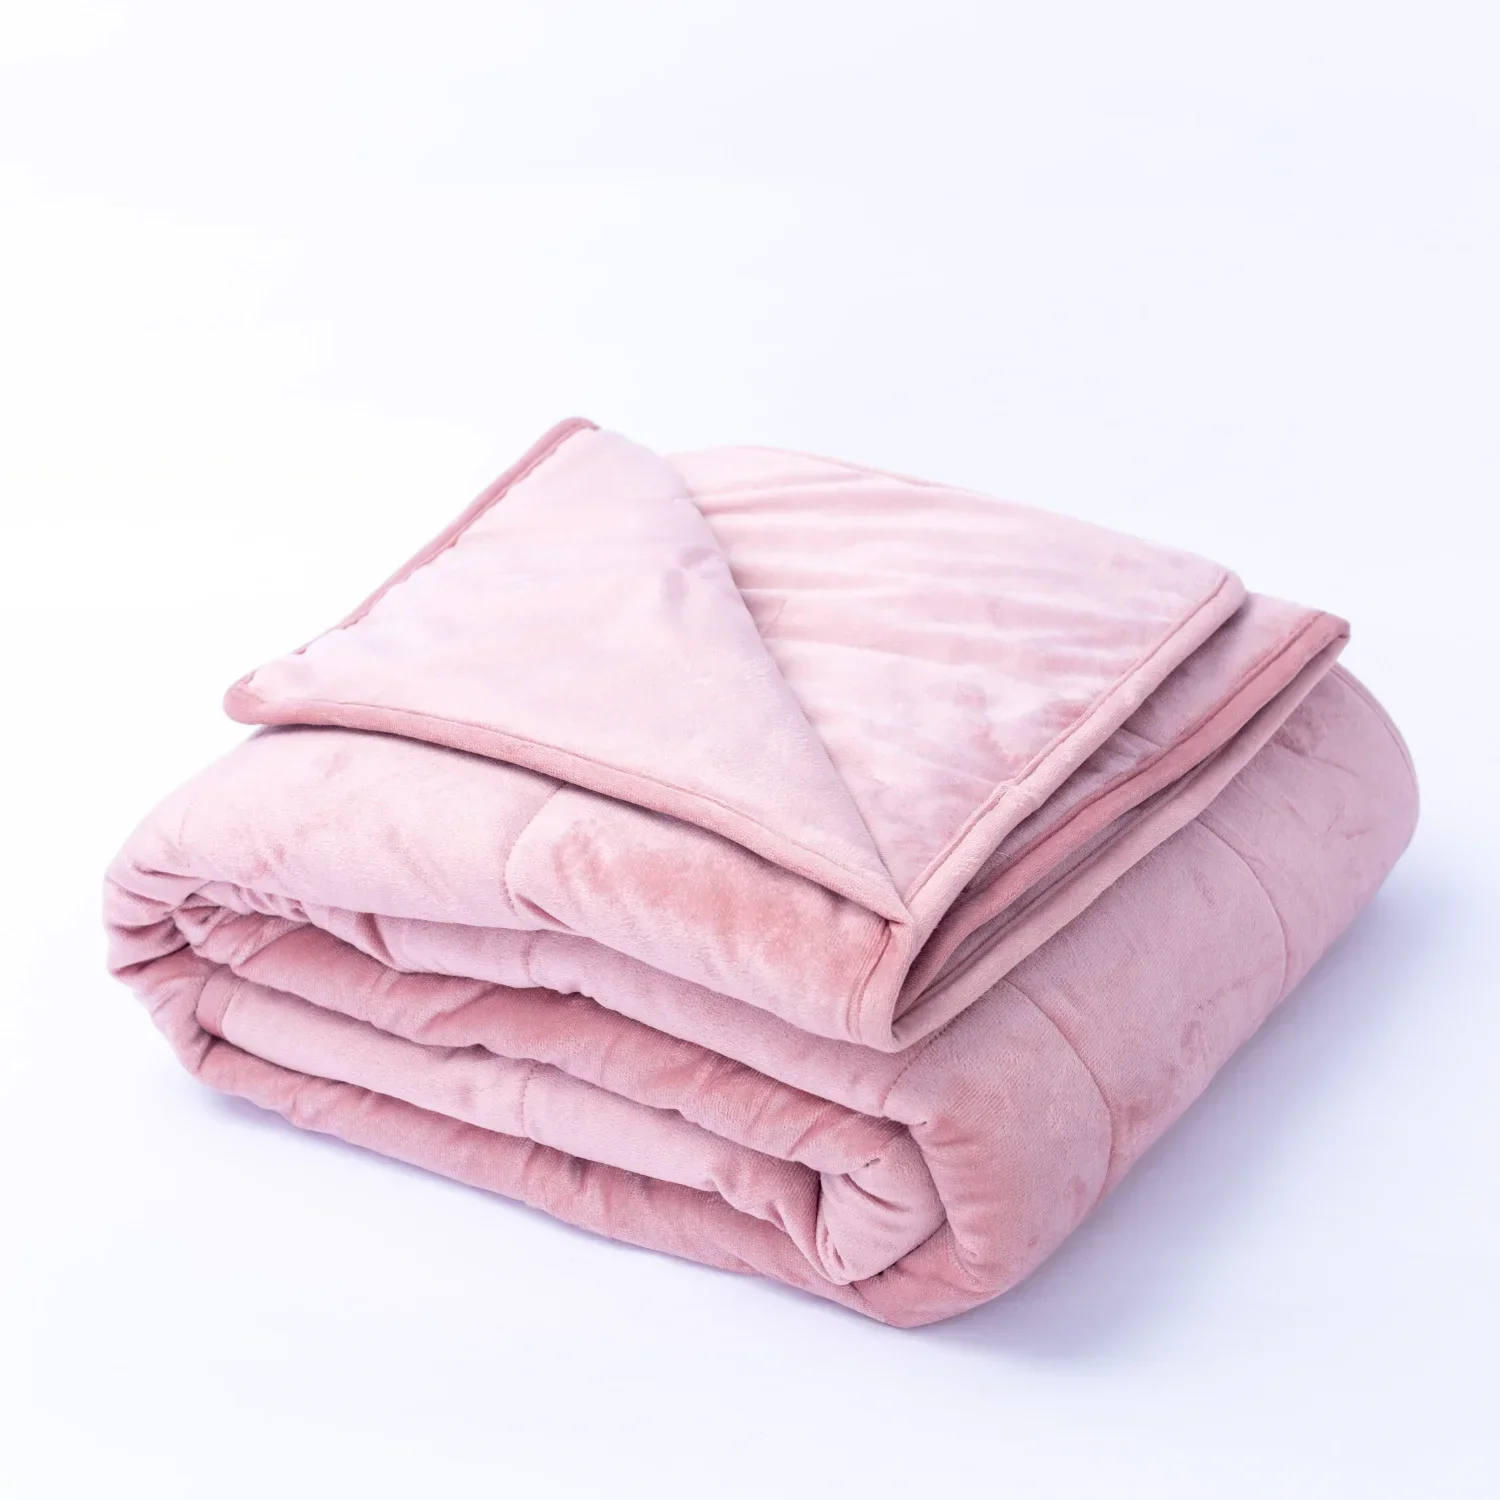 Heated weighted blanket